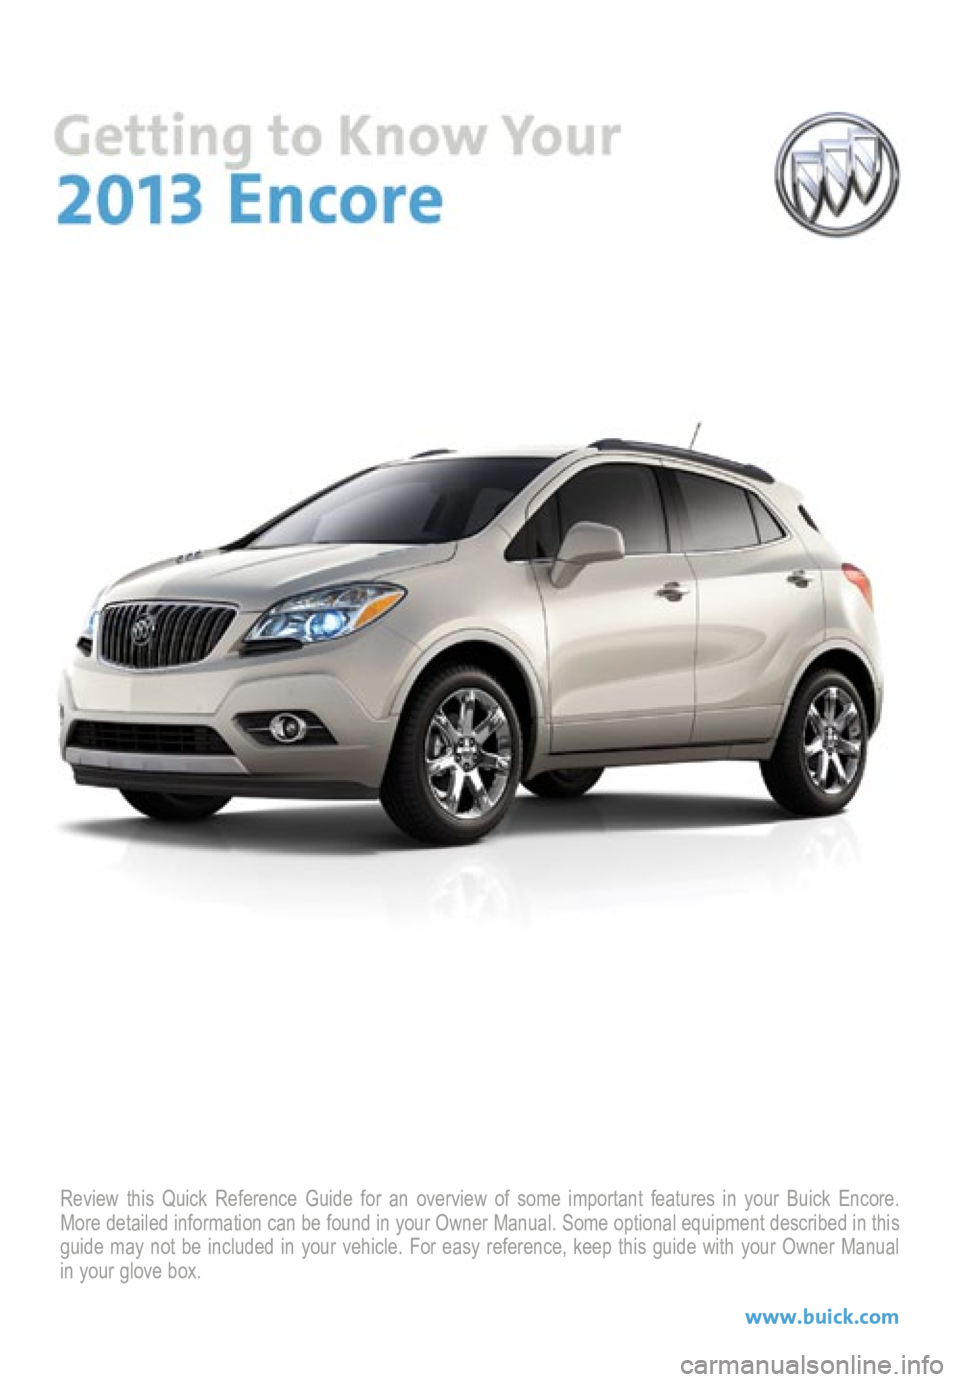 BUICK ENCORE 2013  Get To Know Guide Review this Quick Reference Guide for an overview of some important feat\
ures in your Buick Encore. 
More detailed information can be found in your Owner Manual. Some option\
al equipment described i